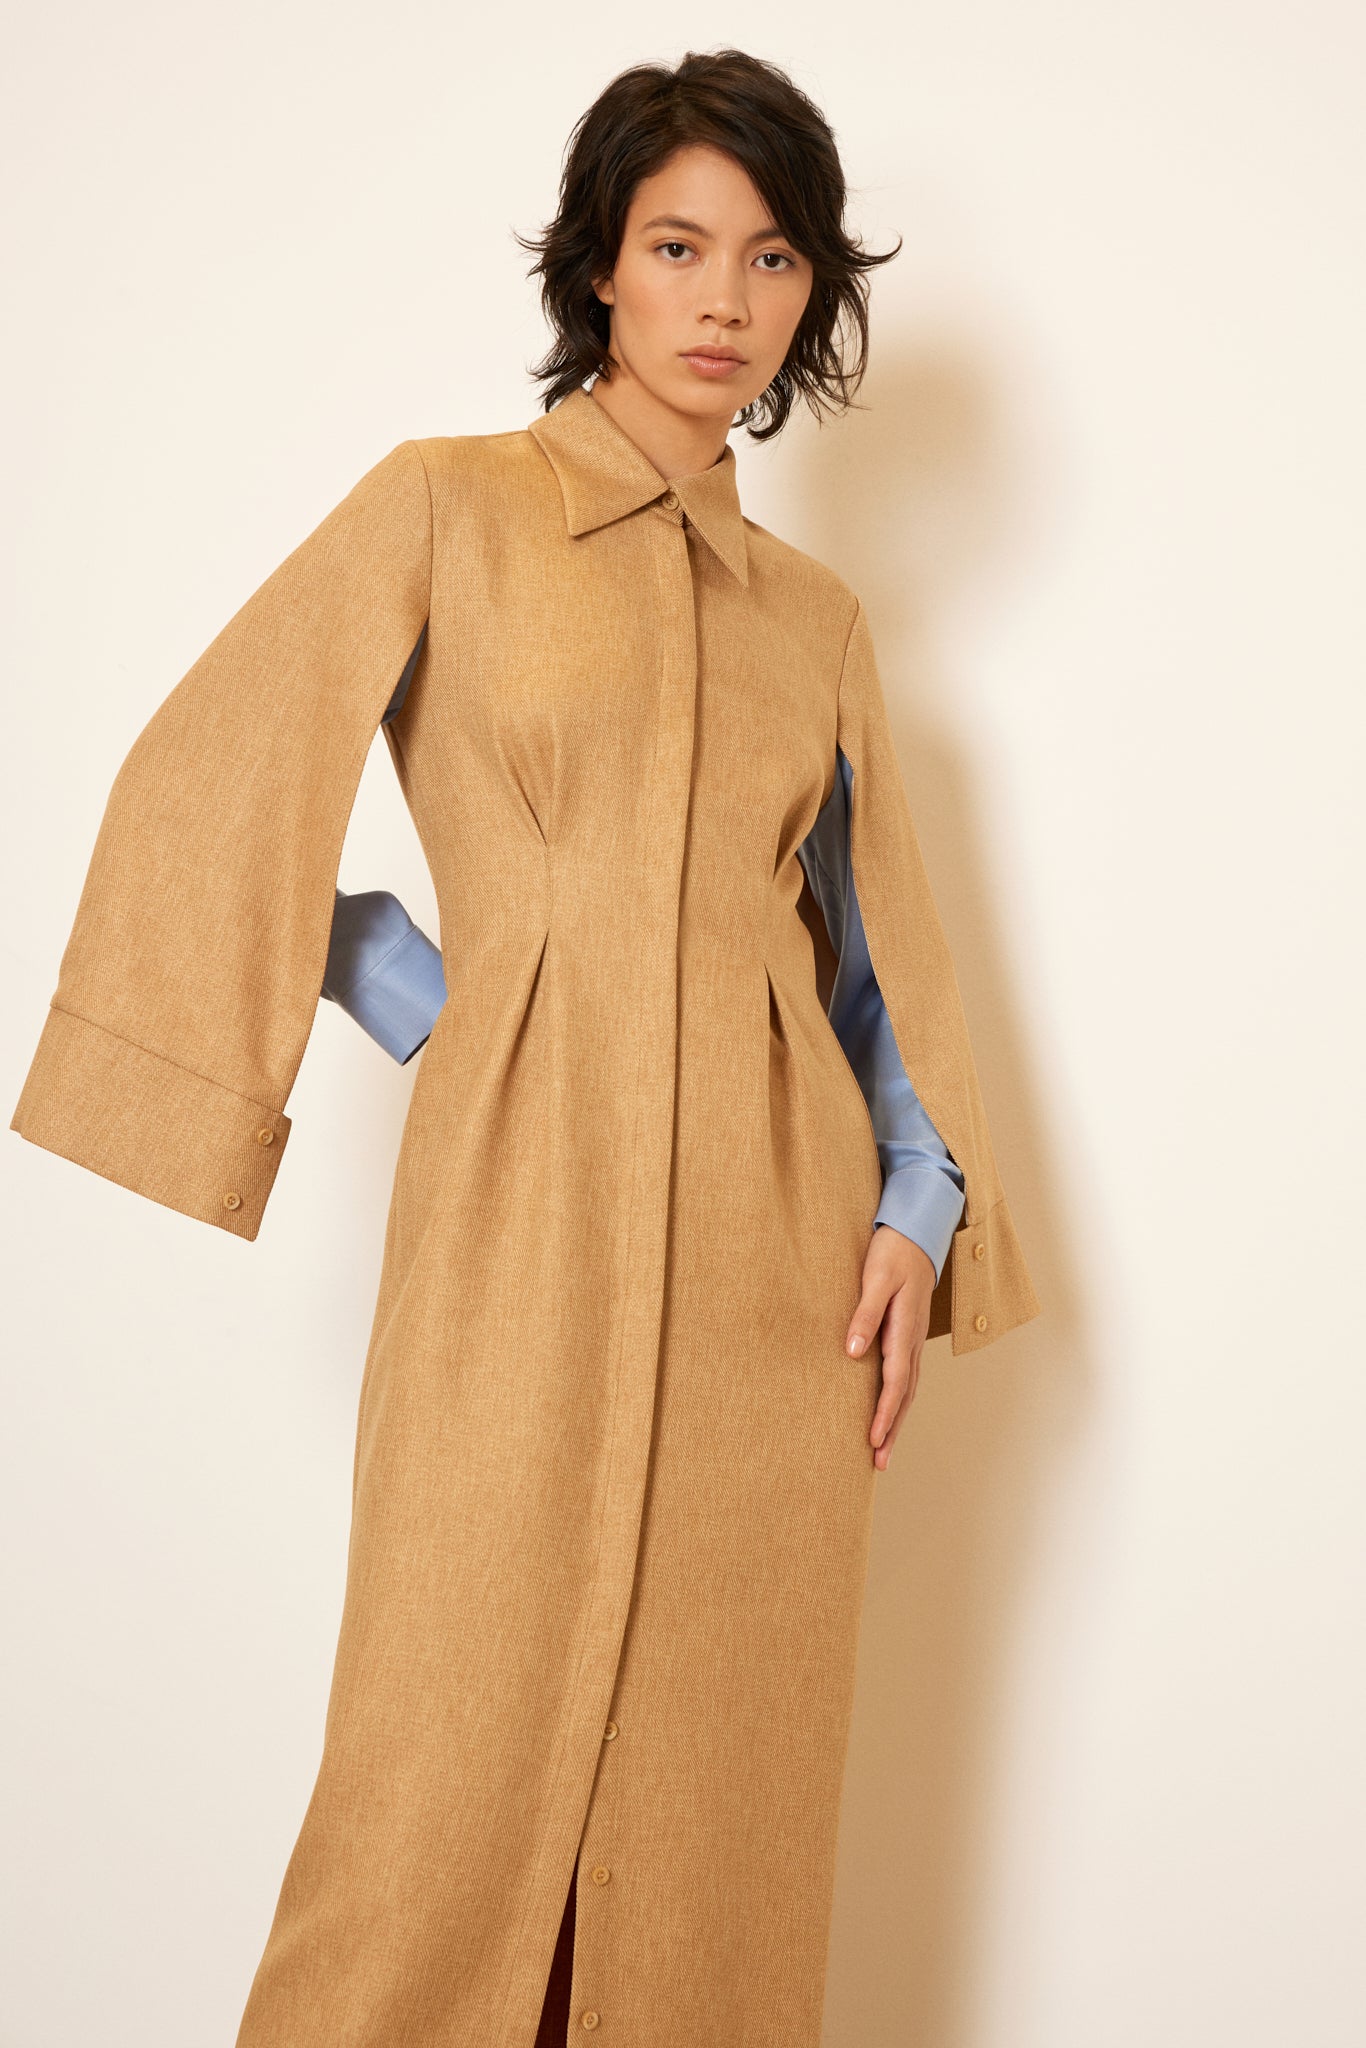 Shirtdress with Layered Sleeves